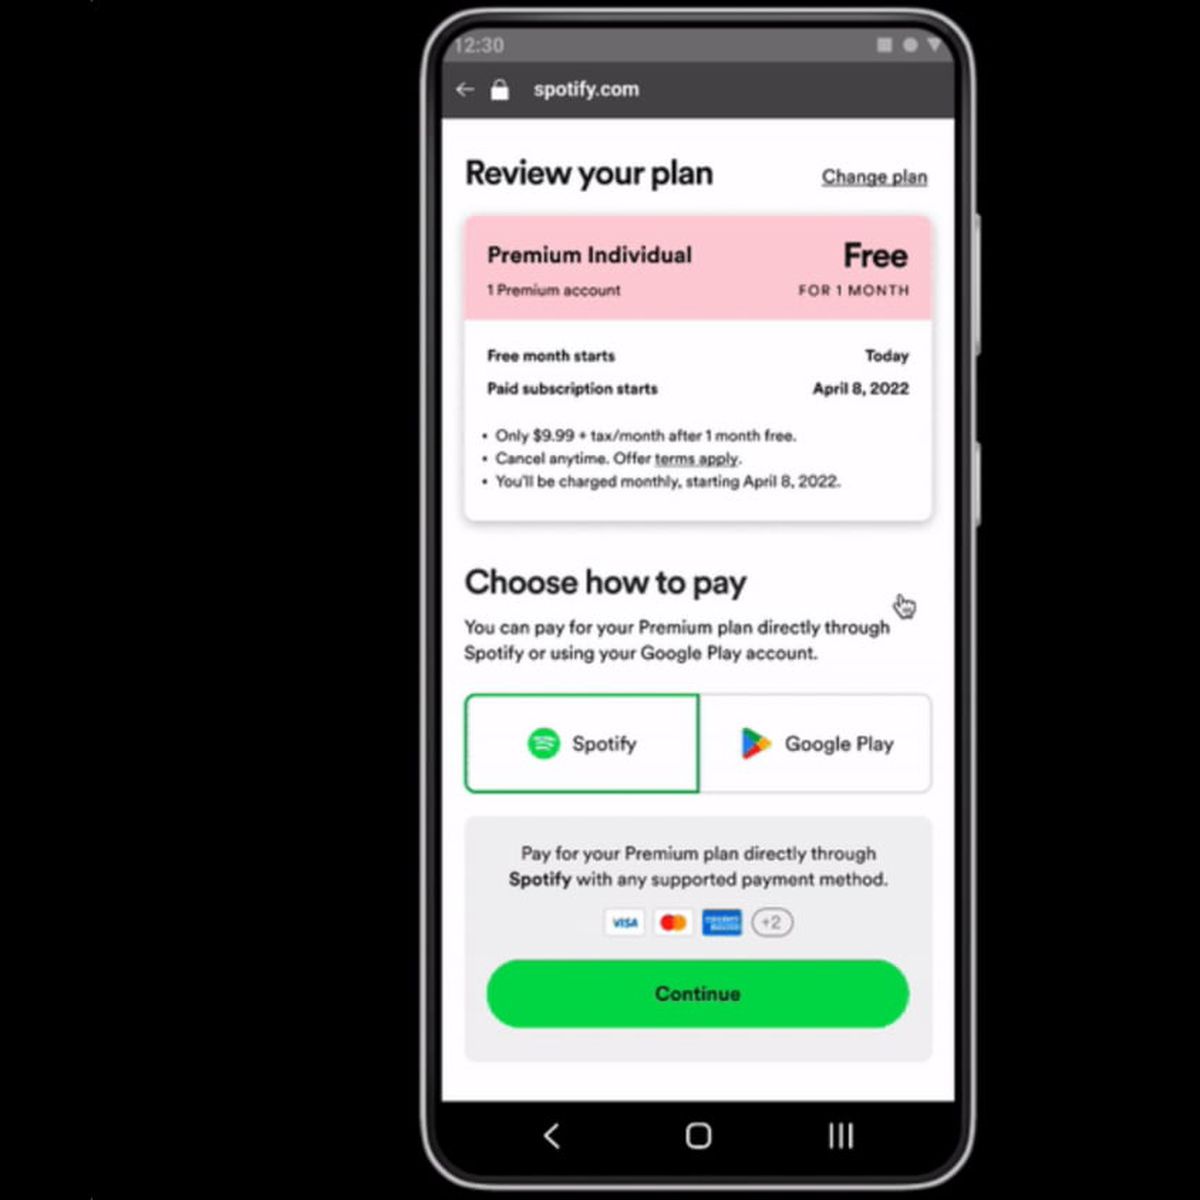 A secret Google deal let Spotify completely bypass Android's app store fees  - The Verge